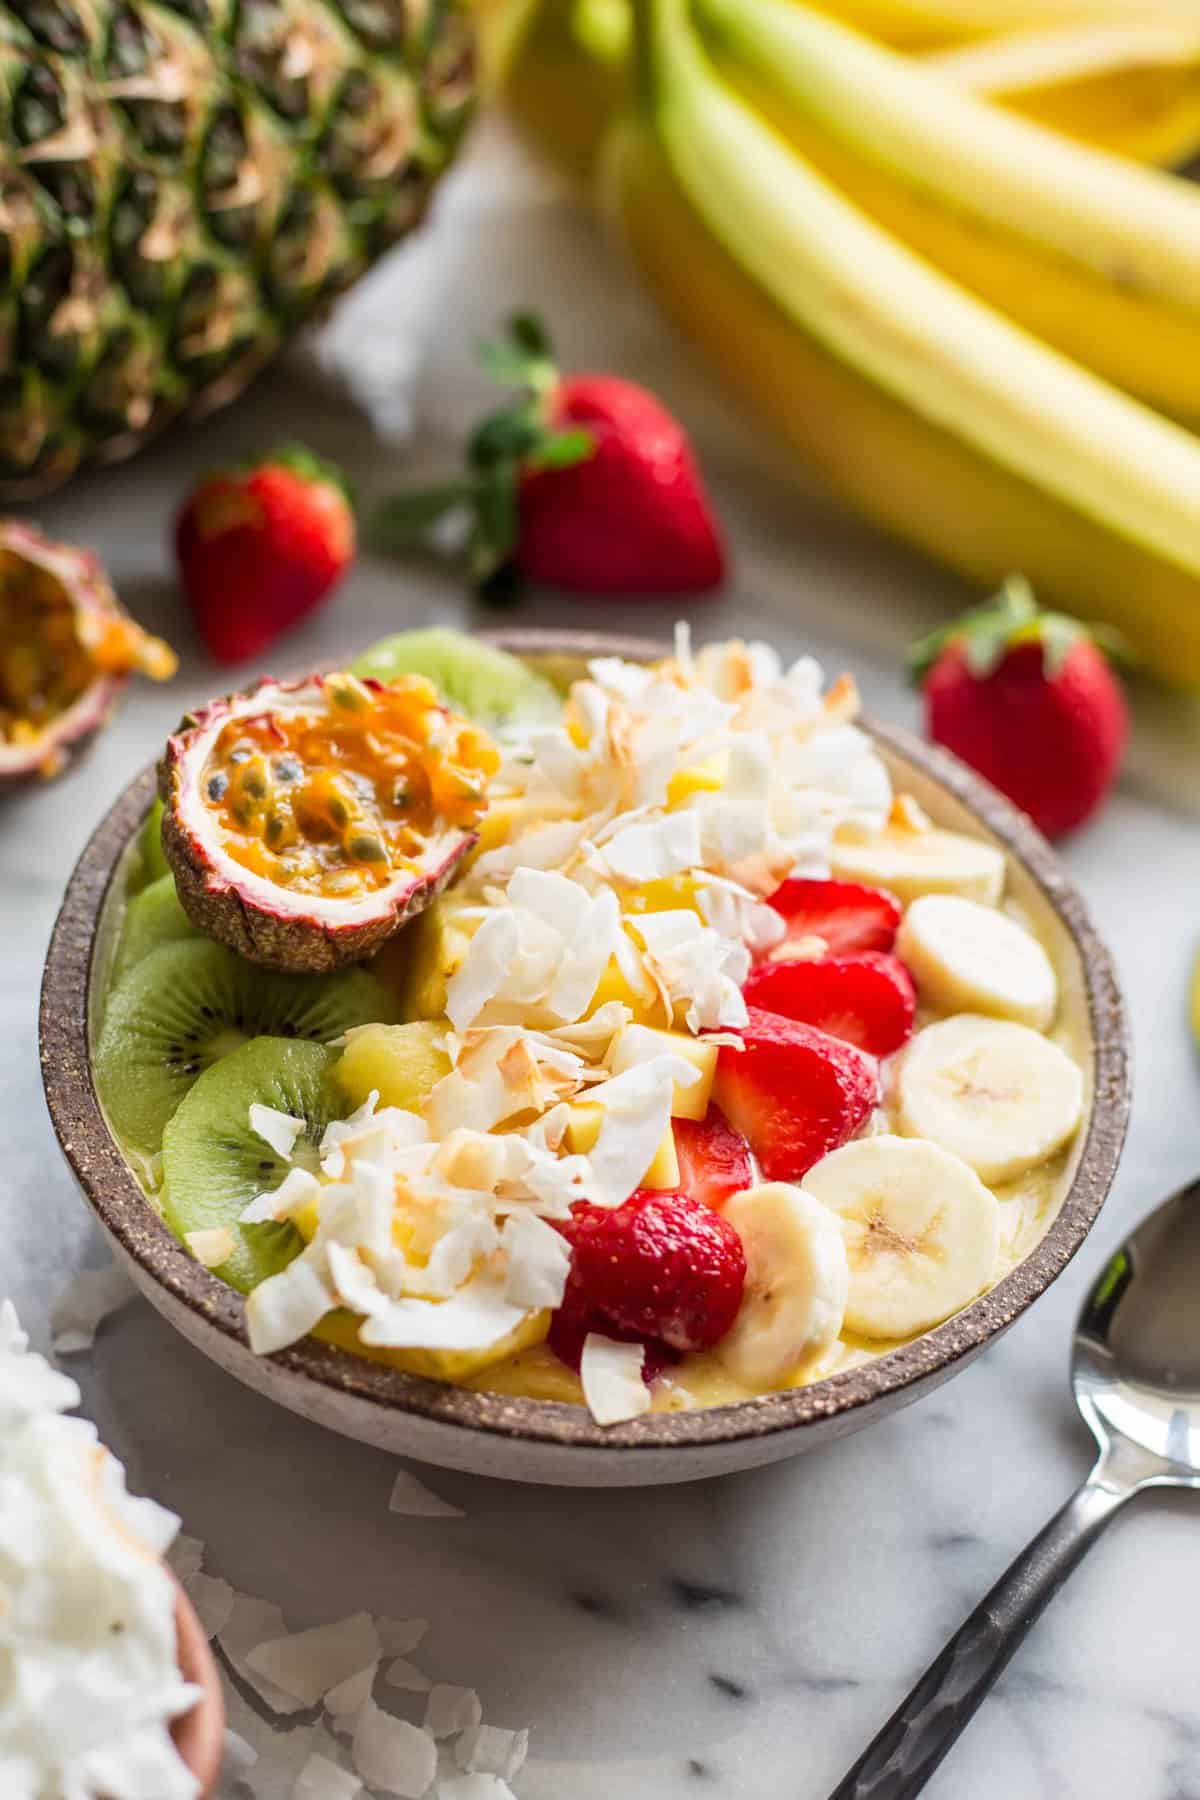 Tropical Smoothie Bowls (Video!)